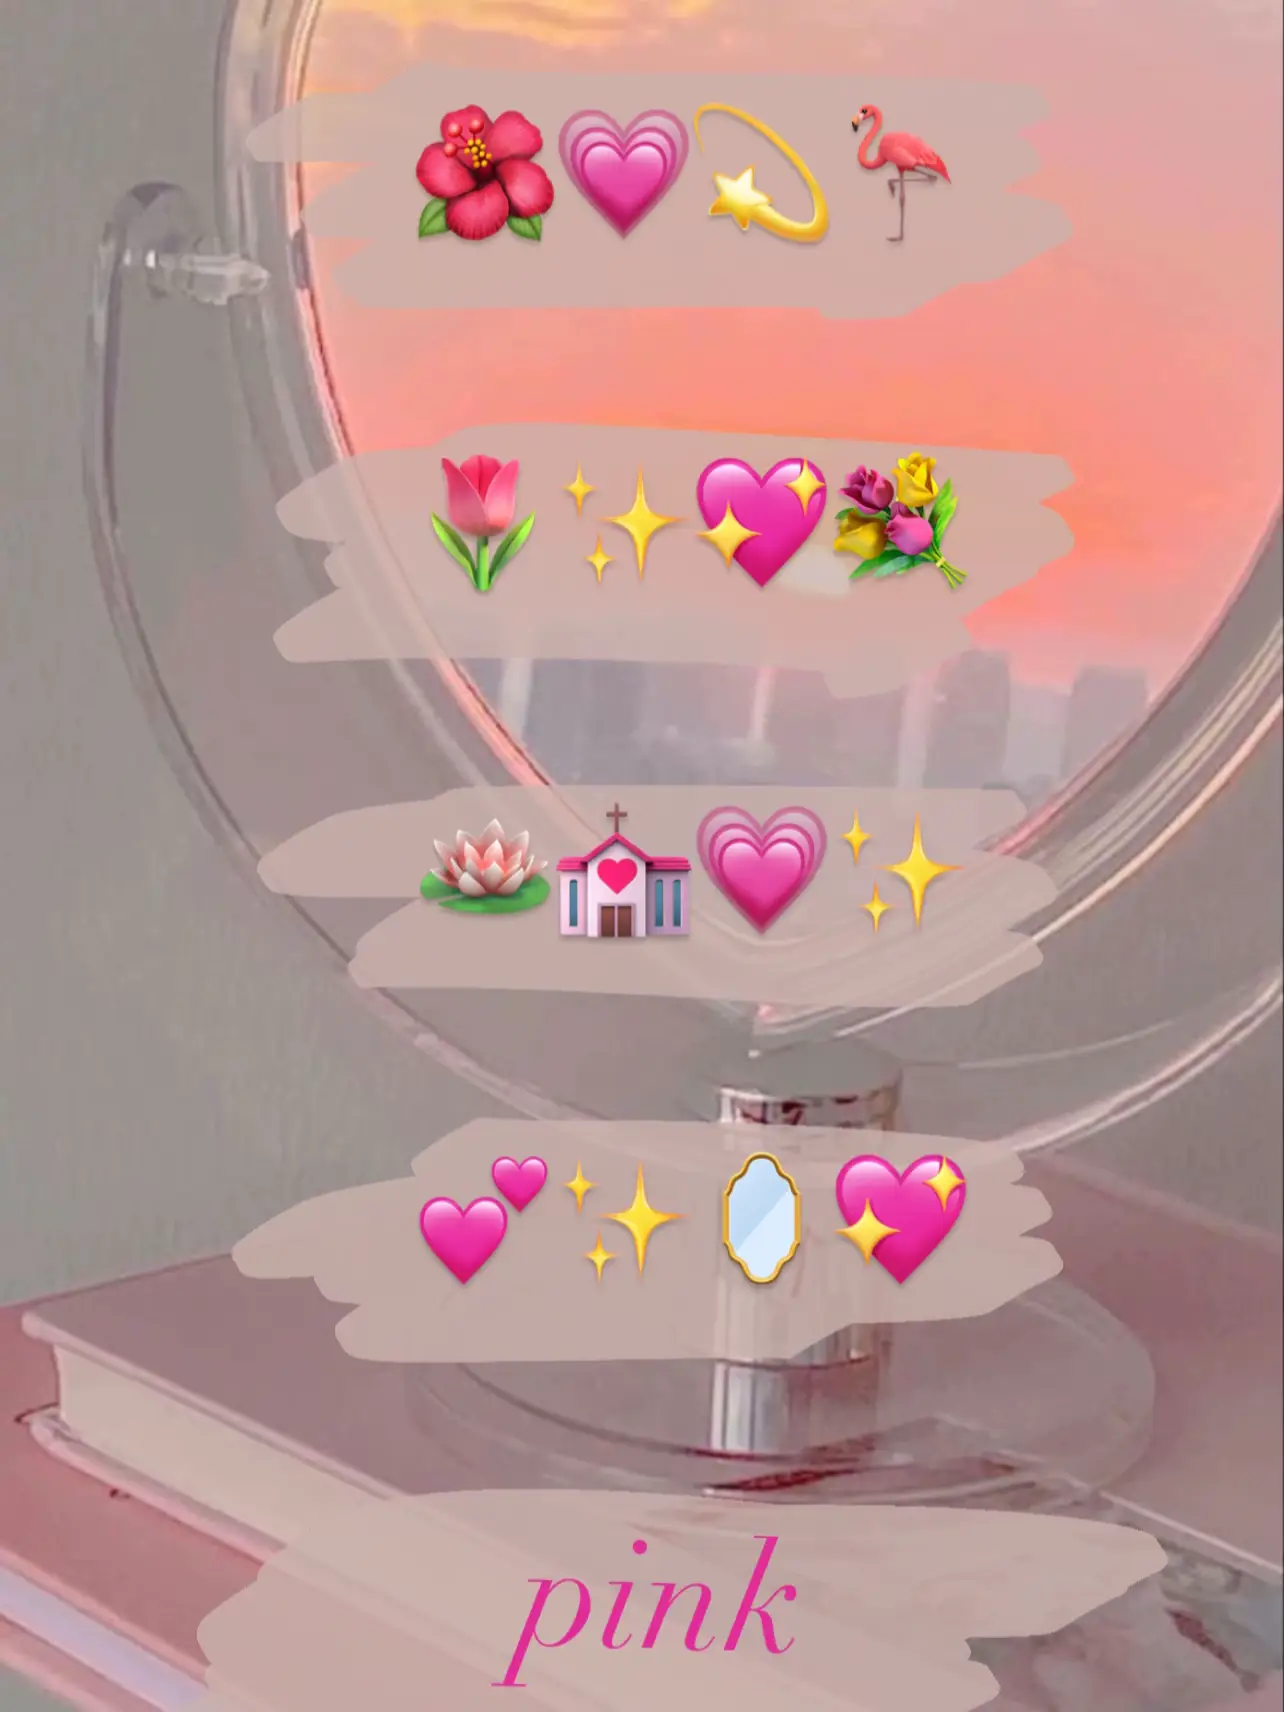 𝔼𝕝𝕚𝕤𝕒 ♡ on X: I already lower them for you 🍭 𝑆𝑢𝑏𝑠𝑐𝑟𝑖𝑏𝑒  𝐹𝑟𝑒𝑒 ♡ 🖇  / X